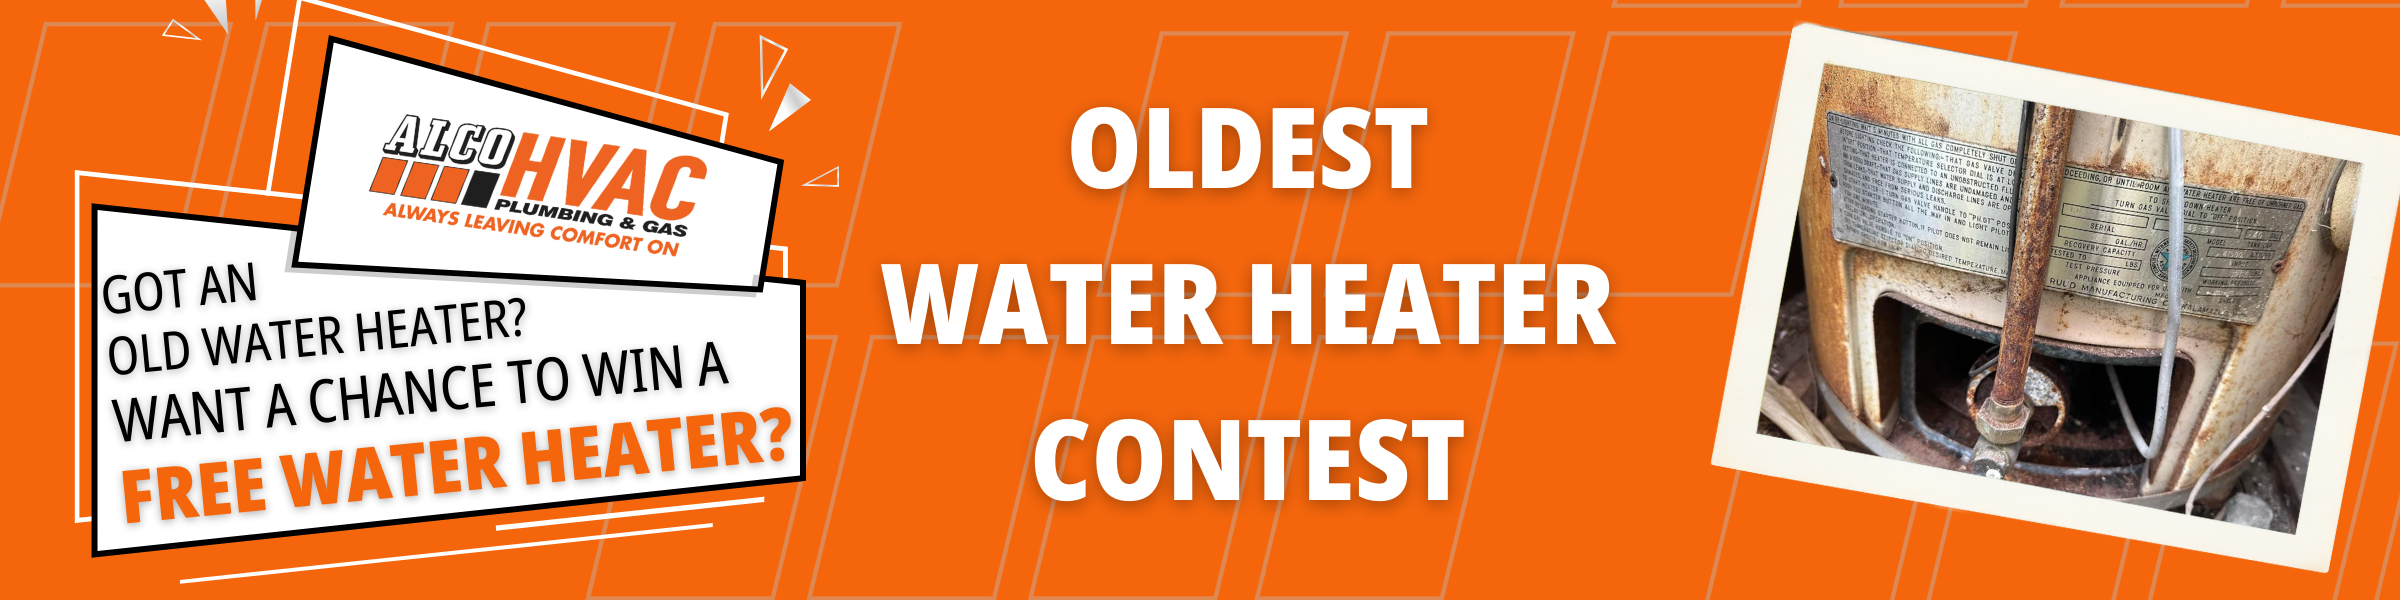 OLDEST WATER HEATER CONTEST! (1)